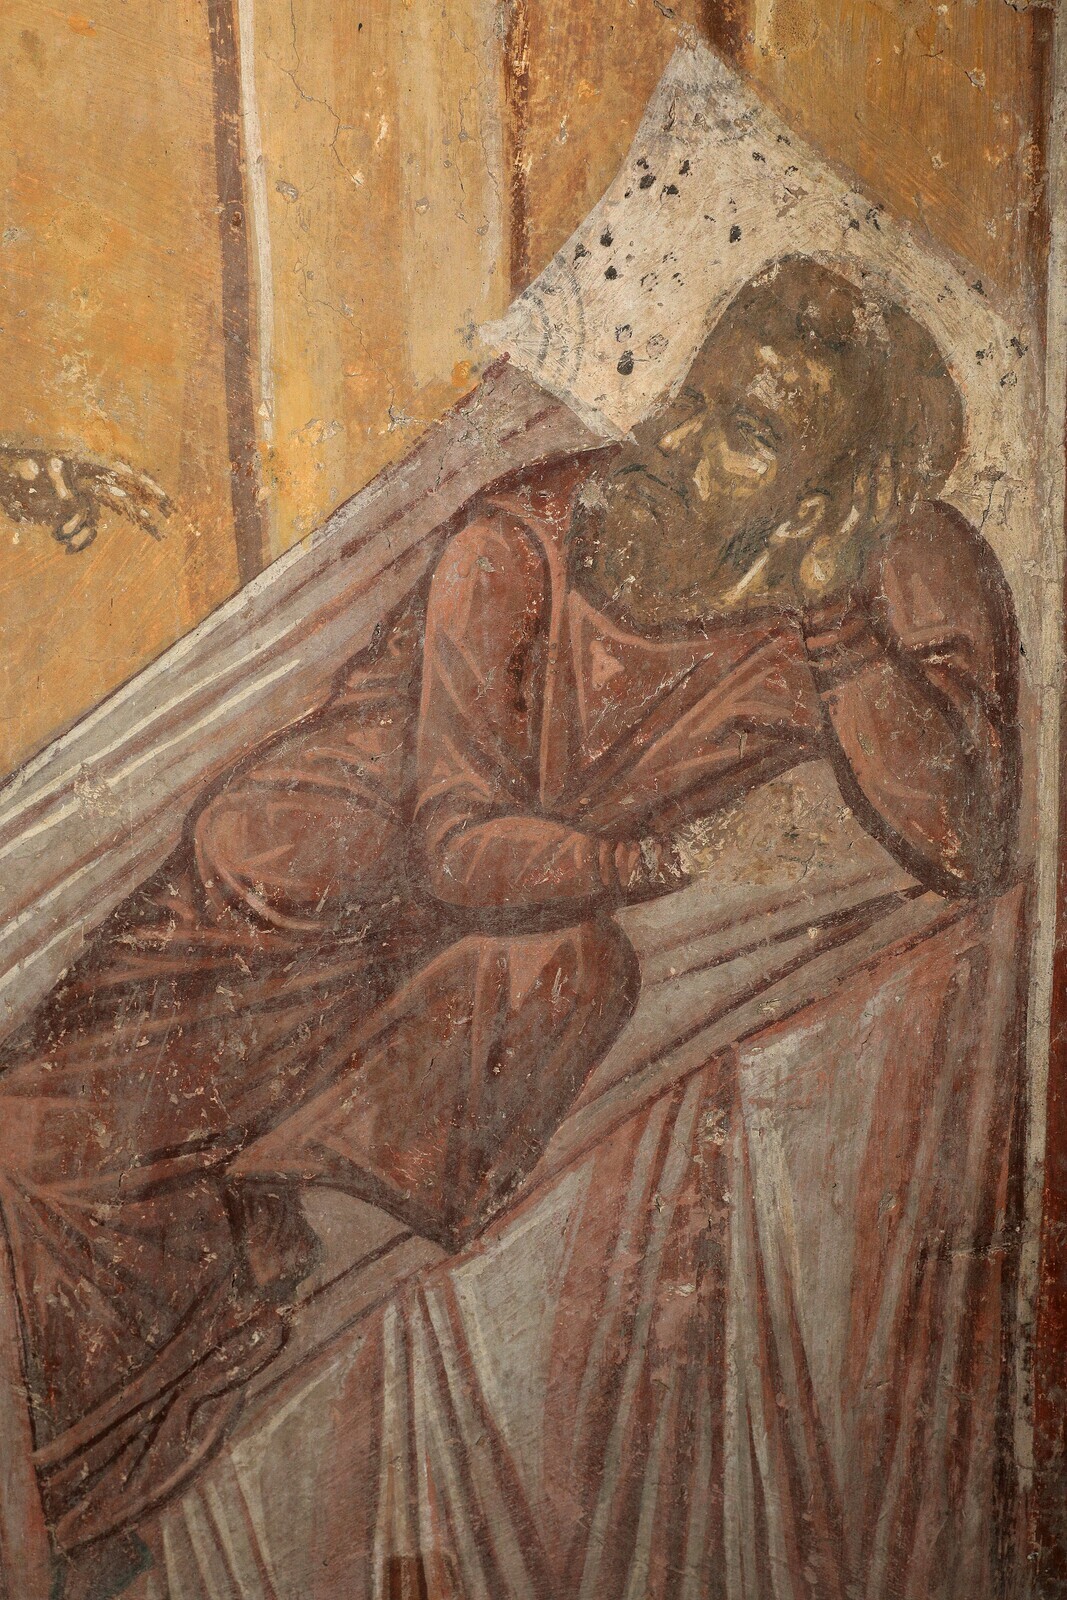 Saint Nicholas Appearing to Constantine and Ablabius in Their Dreams, detail